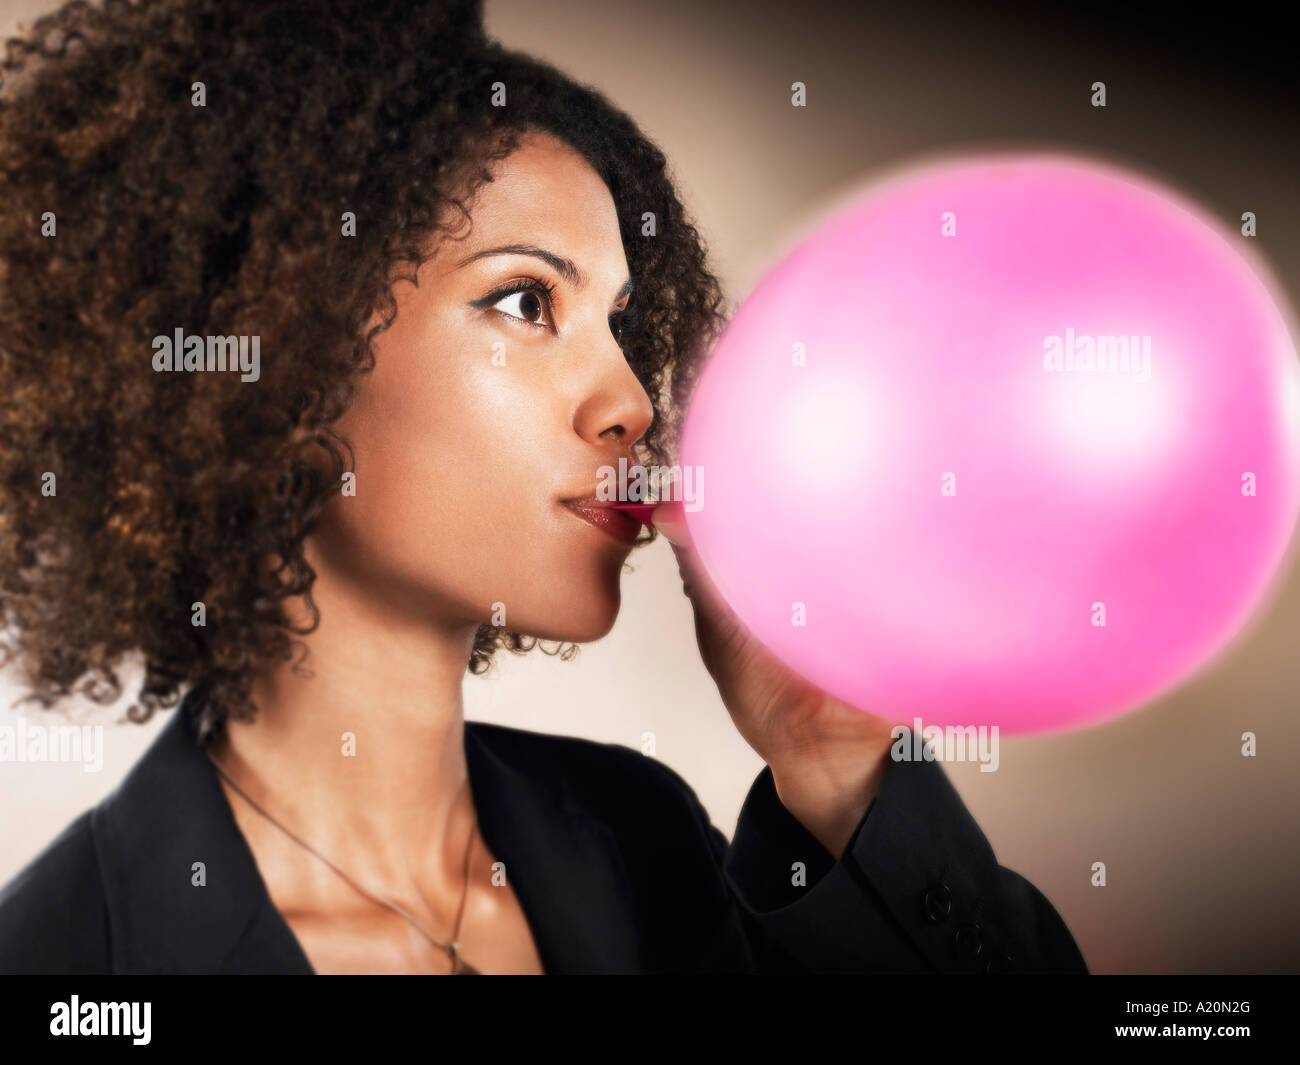 Businesswoman Blowing up Balloon Stock Photo